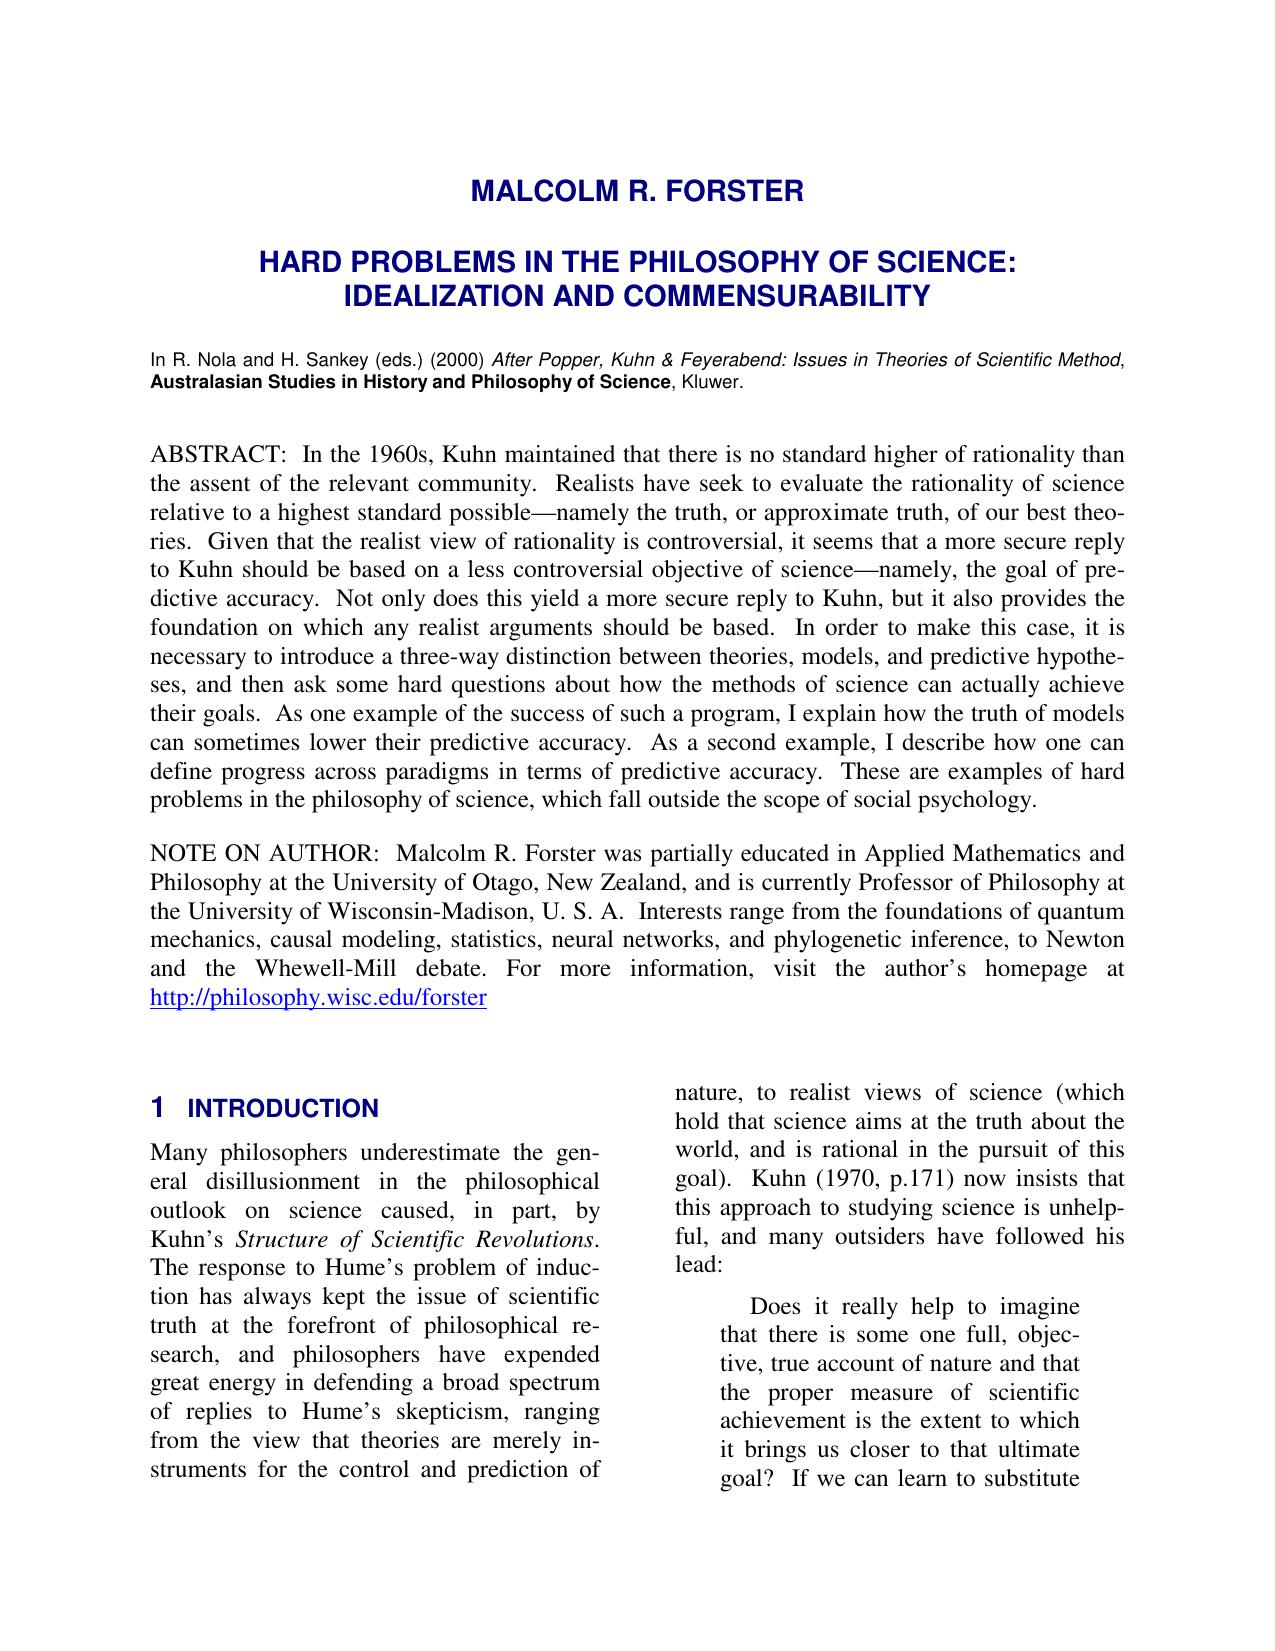 Hard Problems in the Philosophy of Science - Idealization and Commensurability - Paper